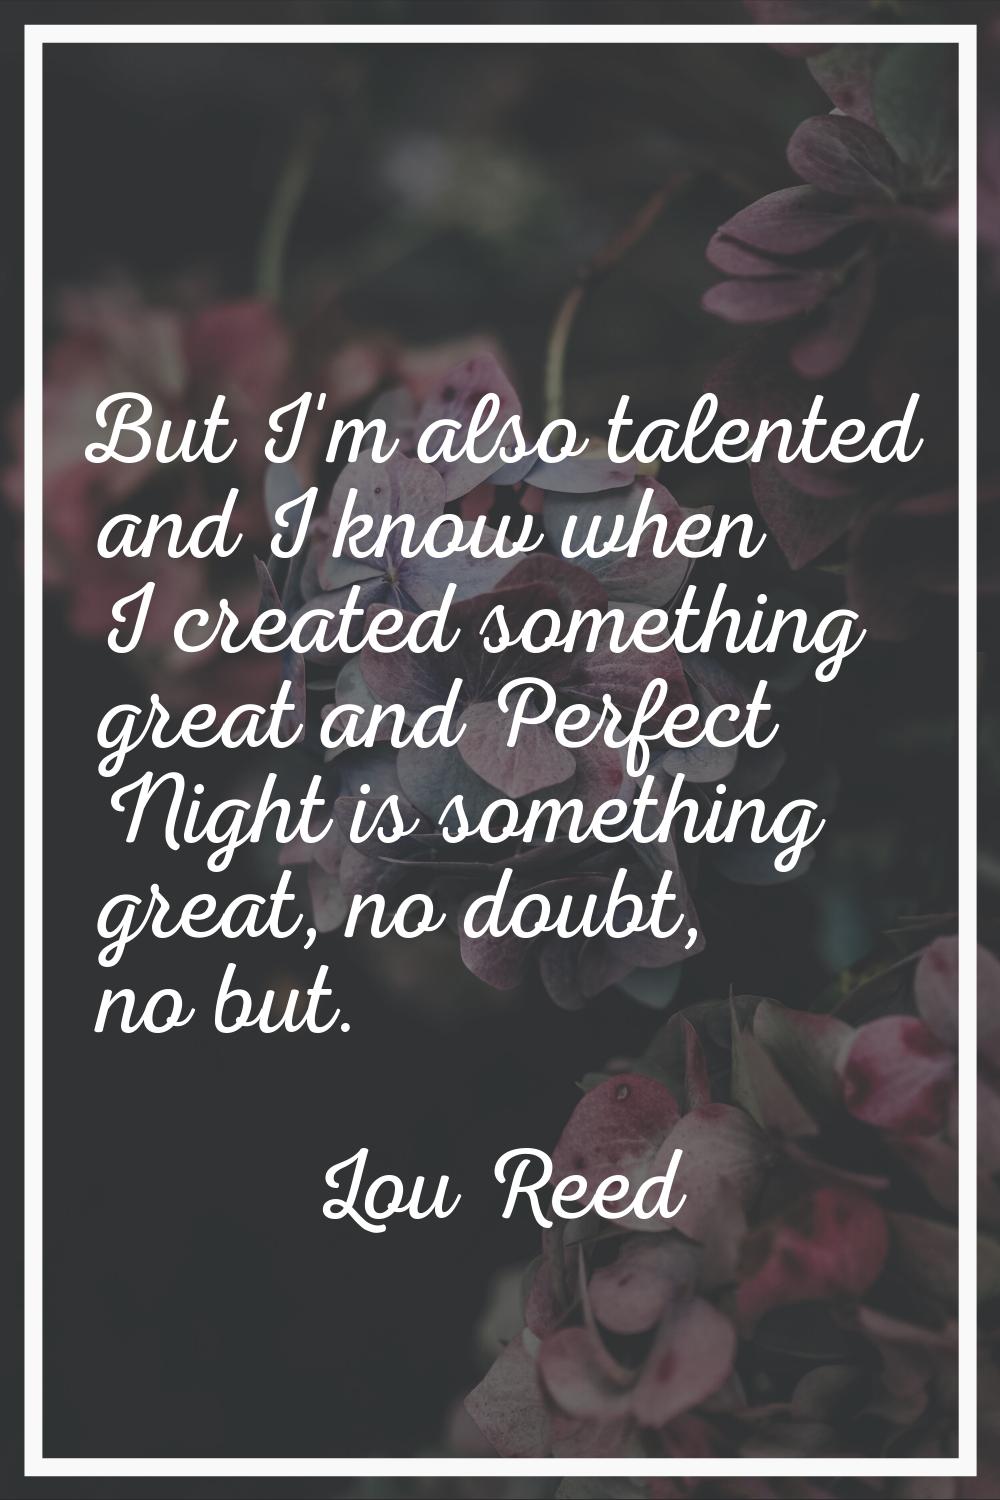 But I'm also talented and I know when I created something great and Perfect Night is something grea